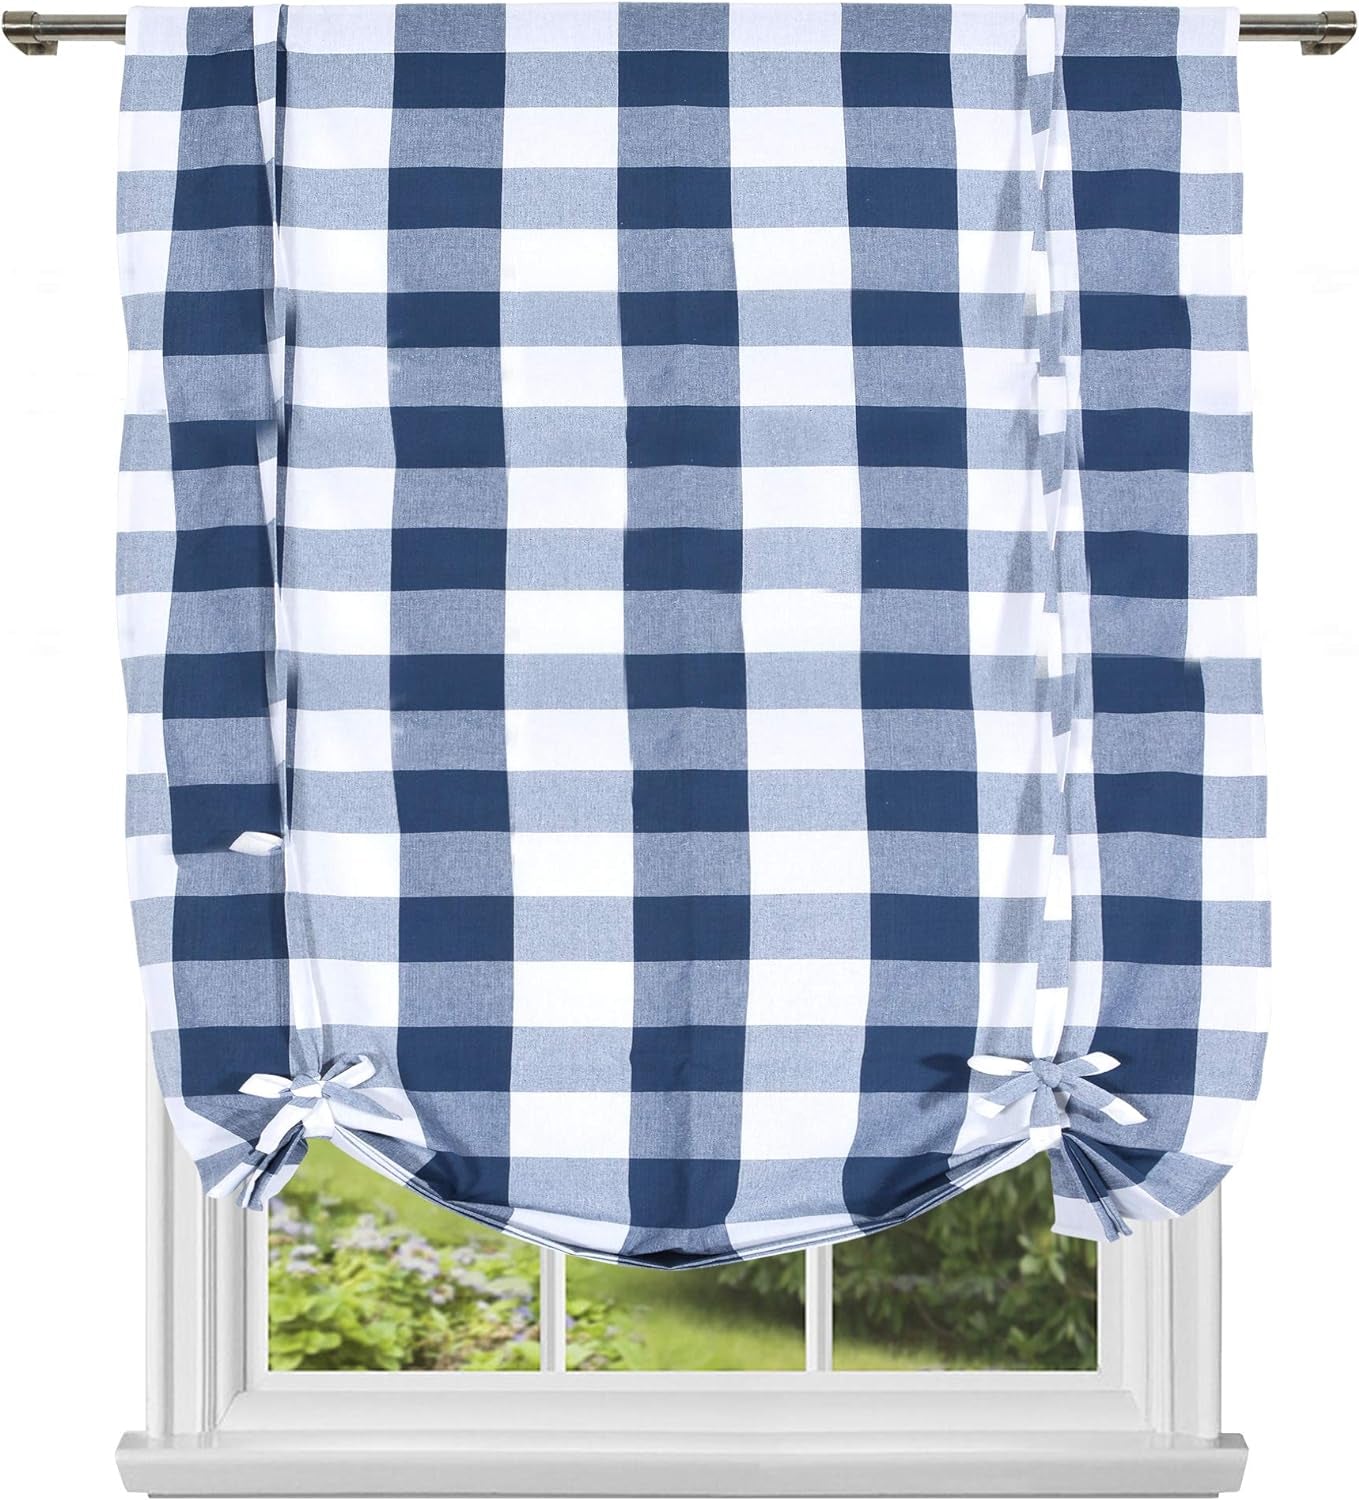 Blackout 365 Aaron Checkered Set Buffalo Plaid Blackout Bedroom-Insulated and Energy Efficient Rod Pocket Window Curtains for Living Room, 37 in X 84 in (W X L), Grey  Blackout 365 Navy 42 In X 63 In (W X L) 